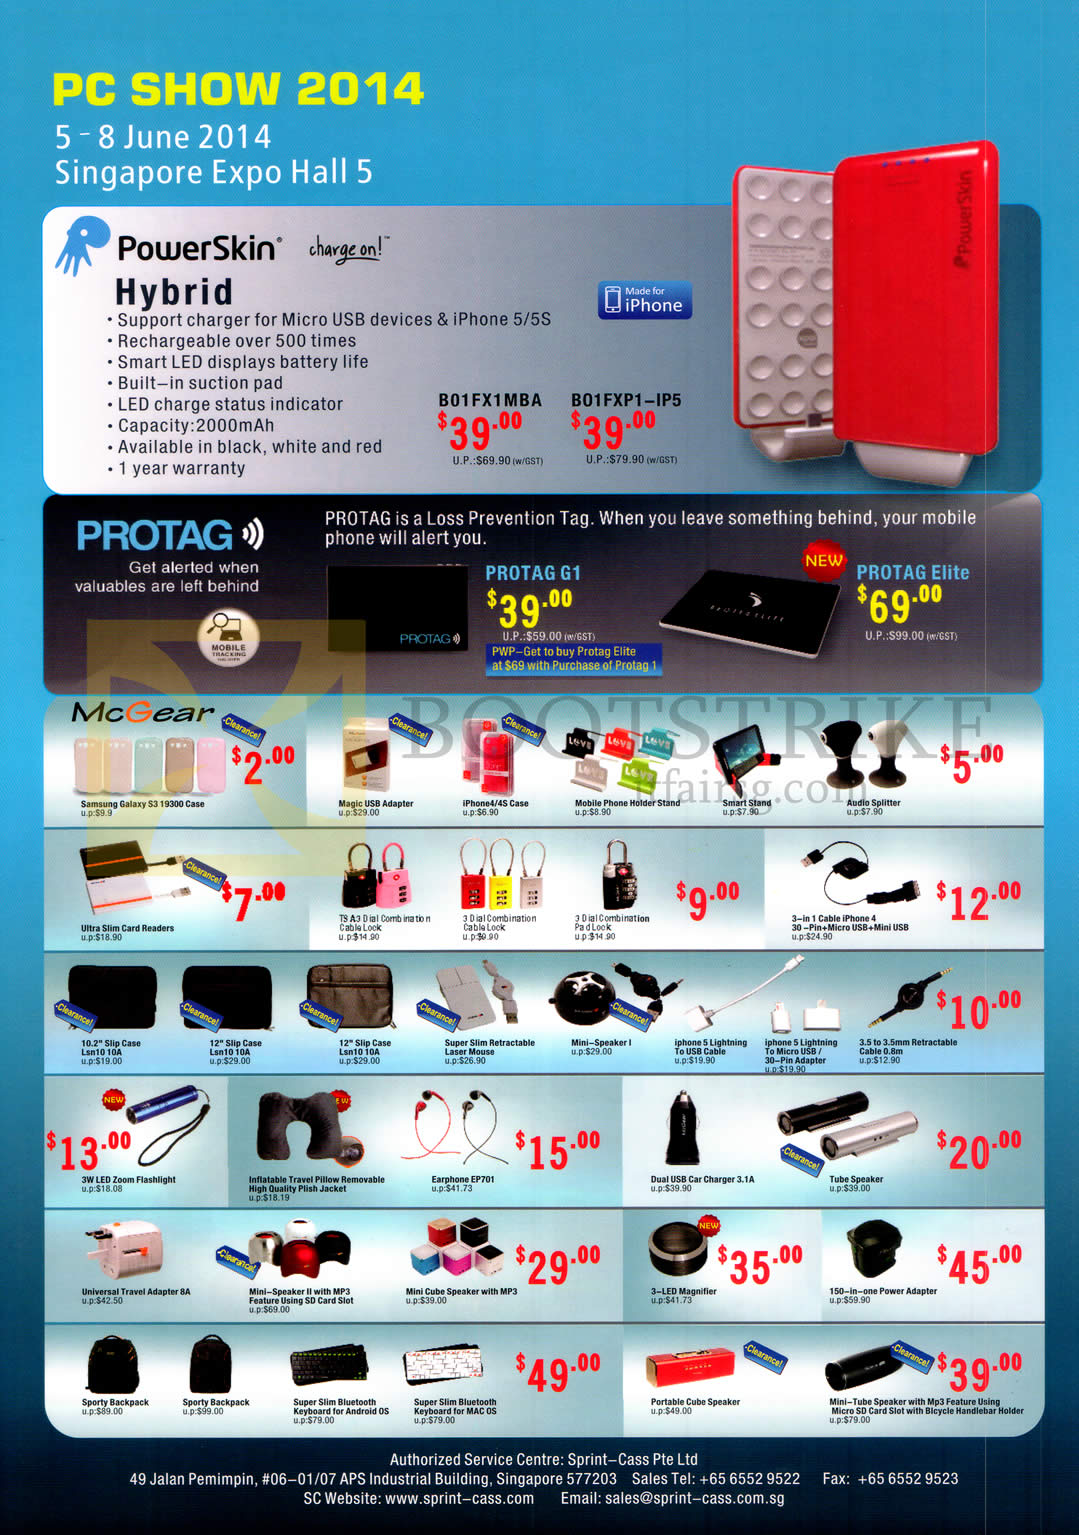 PC SHOW 2014 price list image brochure of Sprint-Cass Accessories PowerSkin Hybrid, Protag G1, Elite, McGear, Mouse, Case, Adapter, Splitter, Backpack